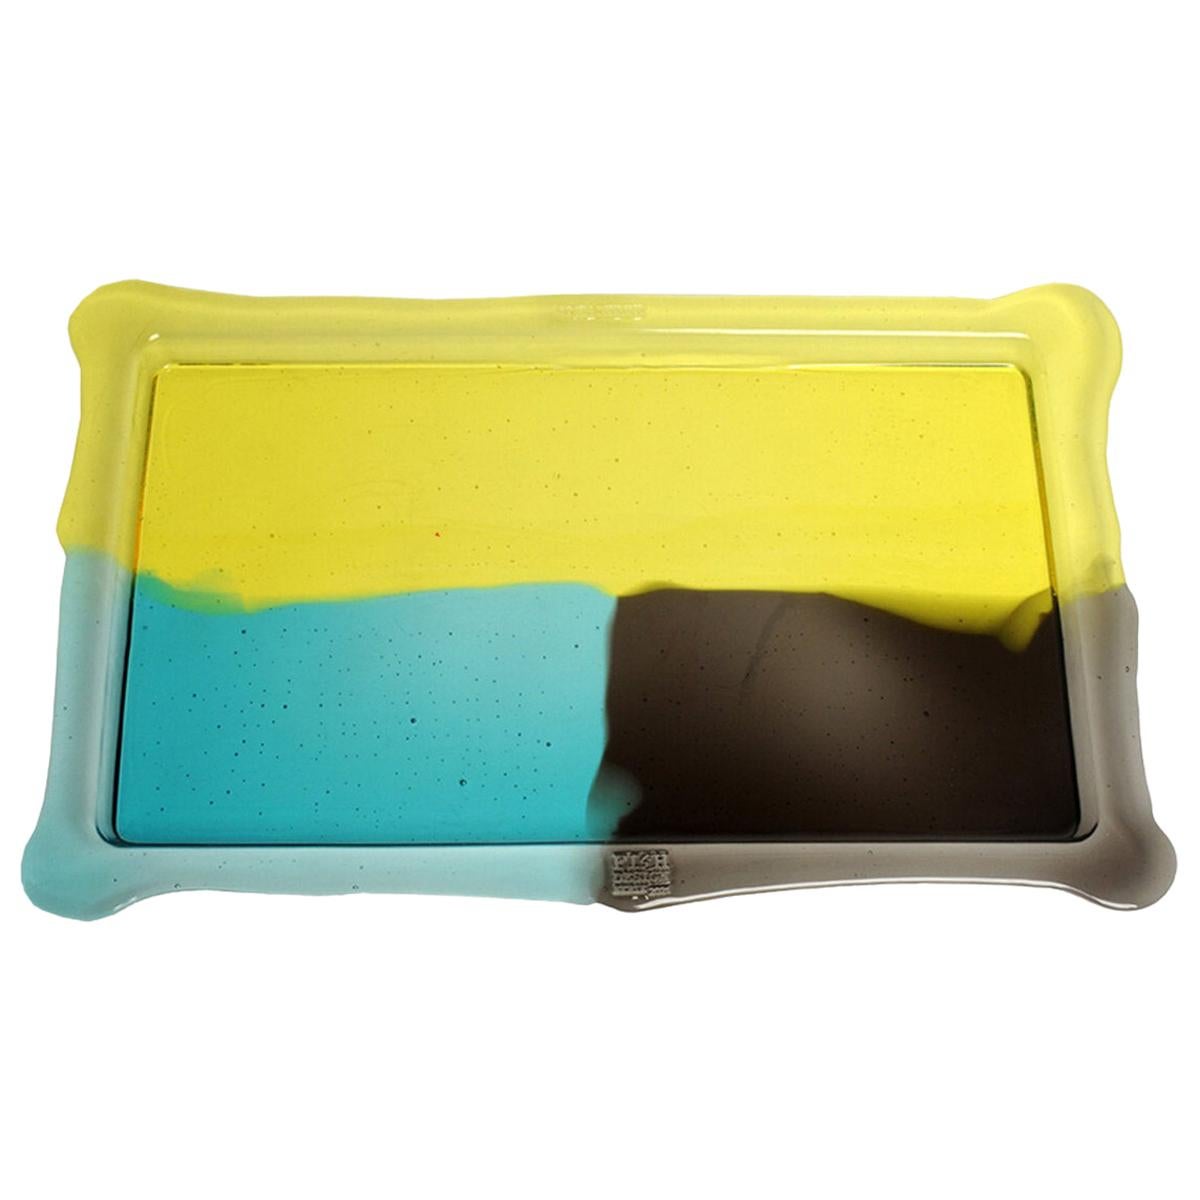 Try-Tray Large Rectangular Tray in Clear Yellow, Aqua, Grey by Gaetano Pesce